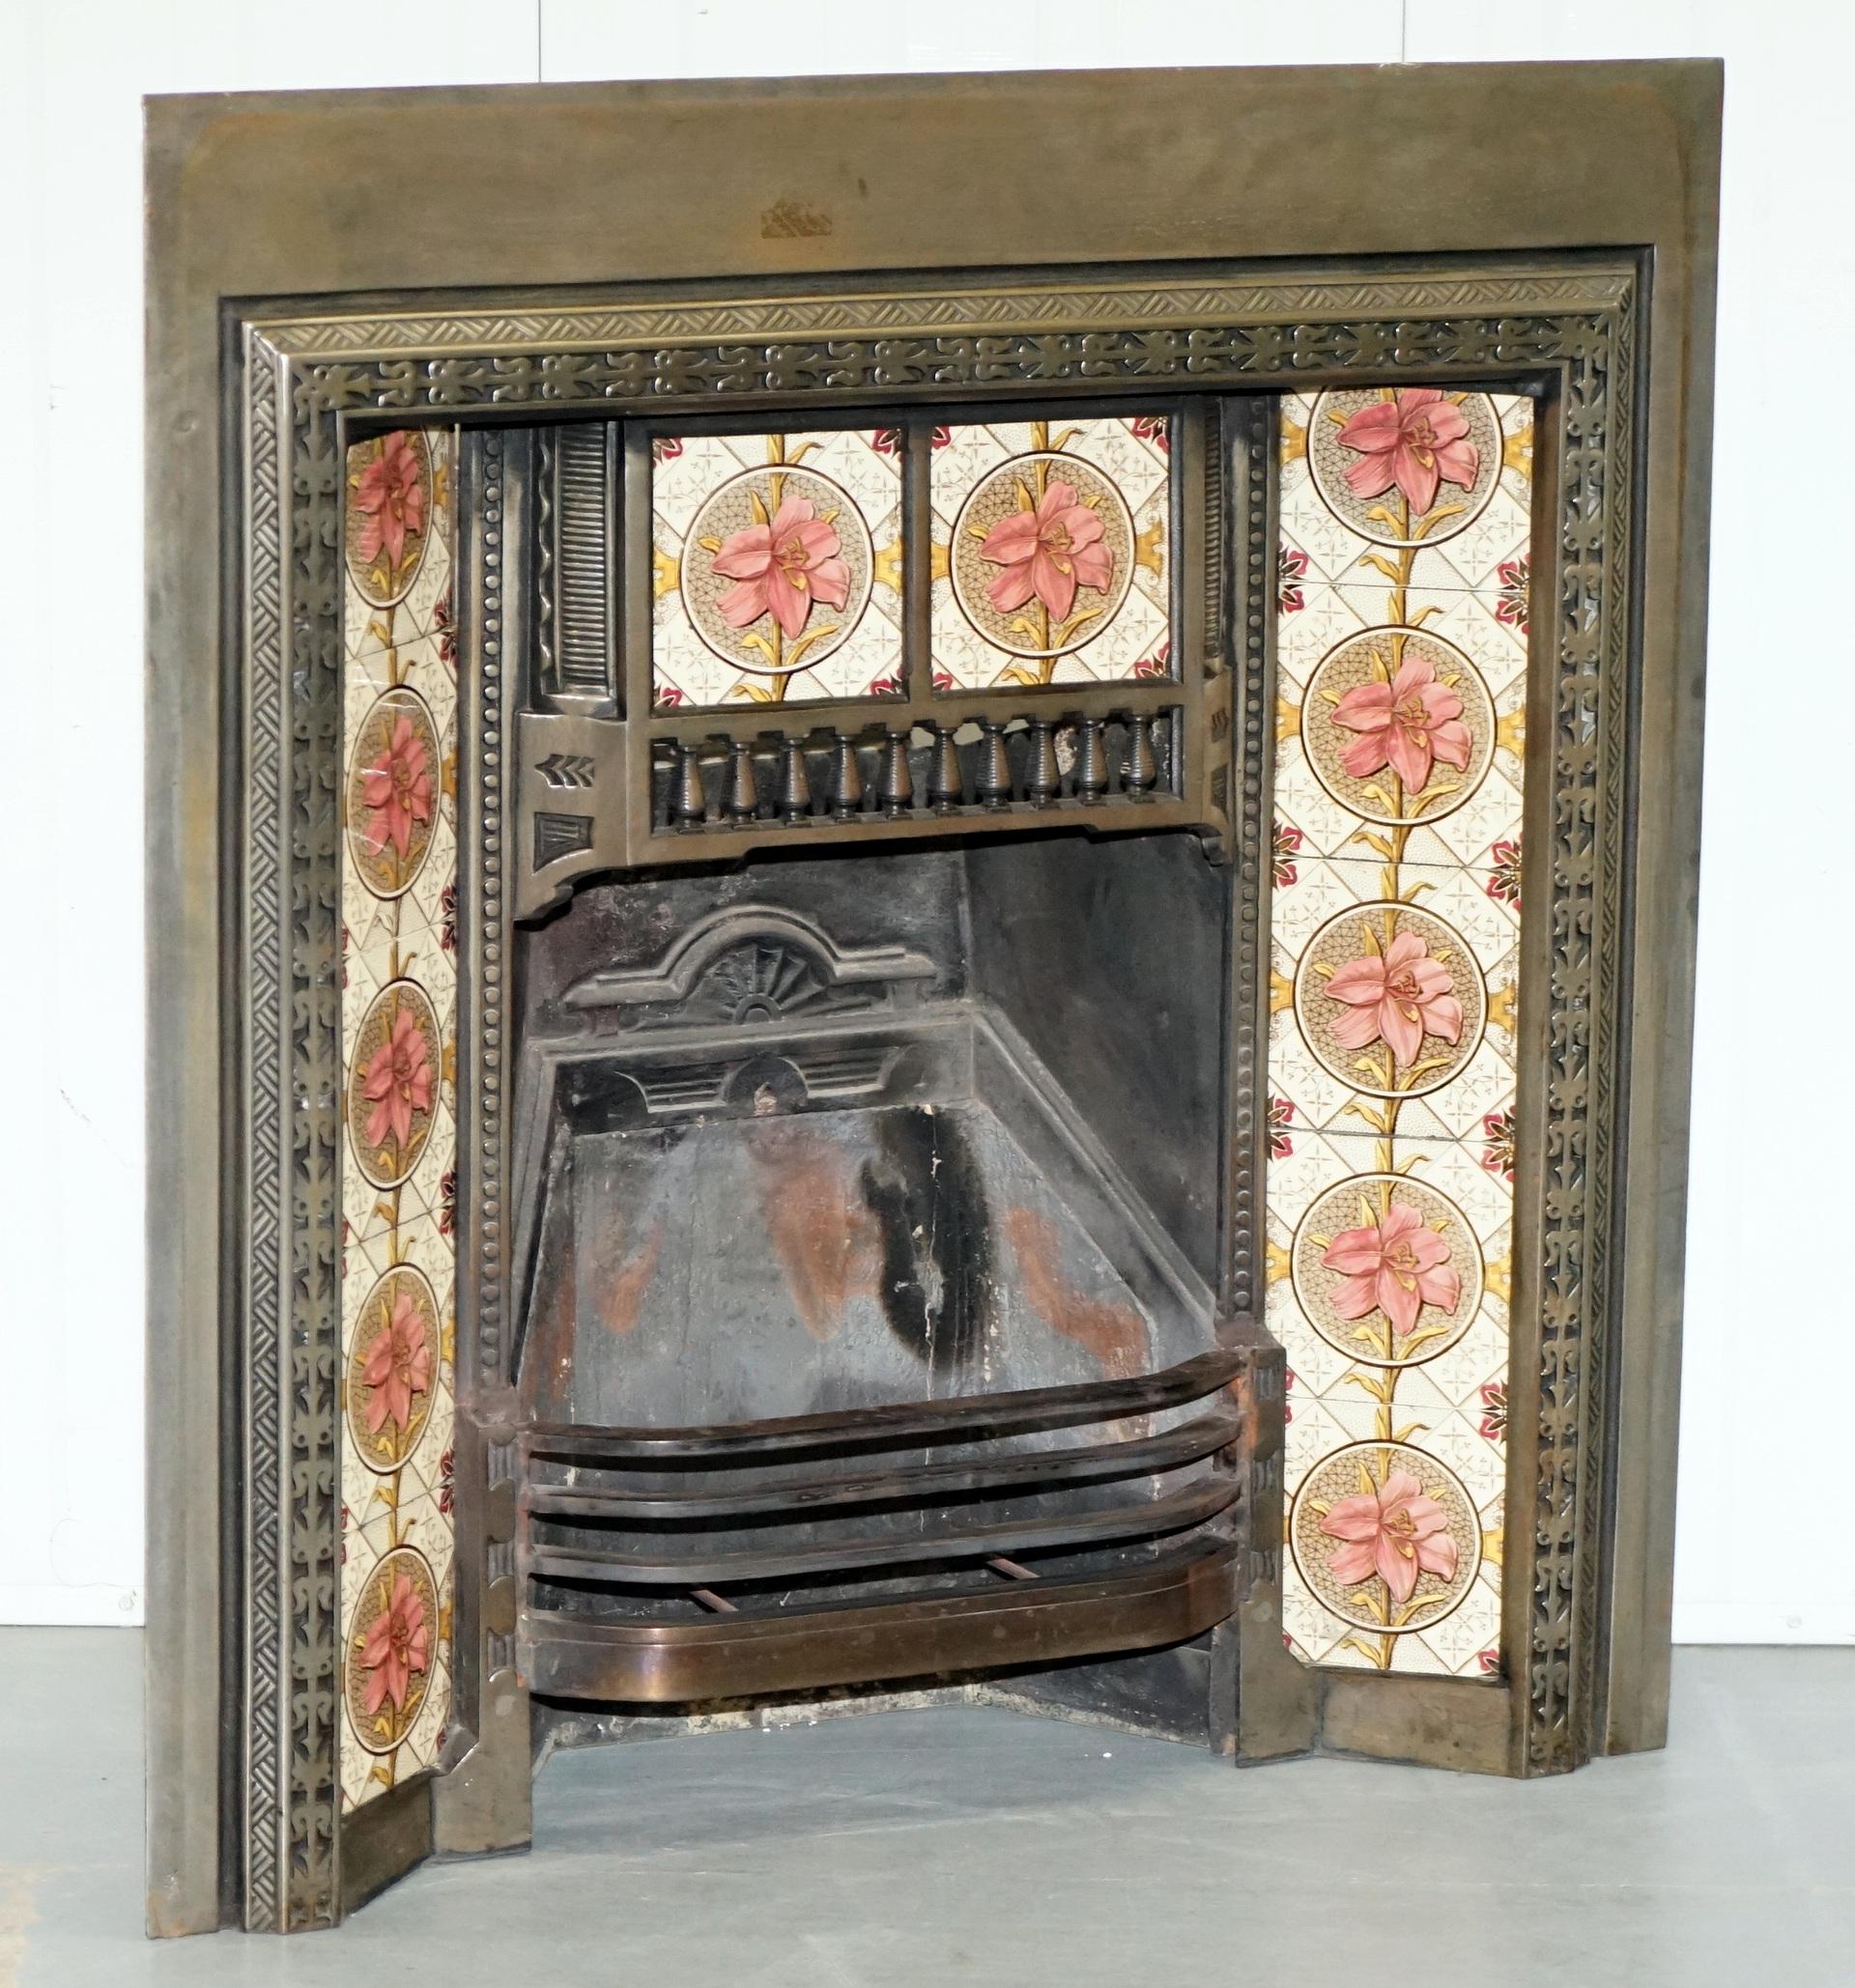 We are delighted to offer for sale this lovely vintage cast iron with silvered finish Fireplace insert complete with hand painted tiles

A very nice Victorian style fireplace insert, it came to me exactly as you see it, a client of mine was